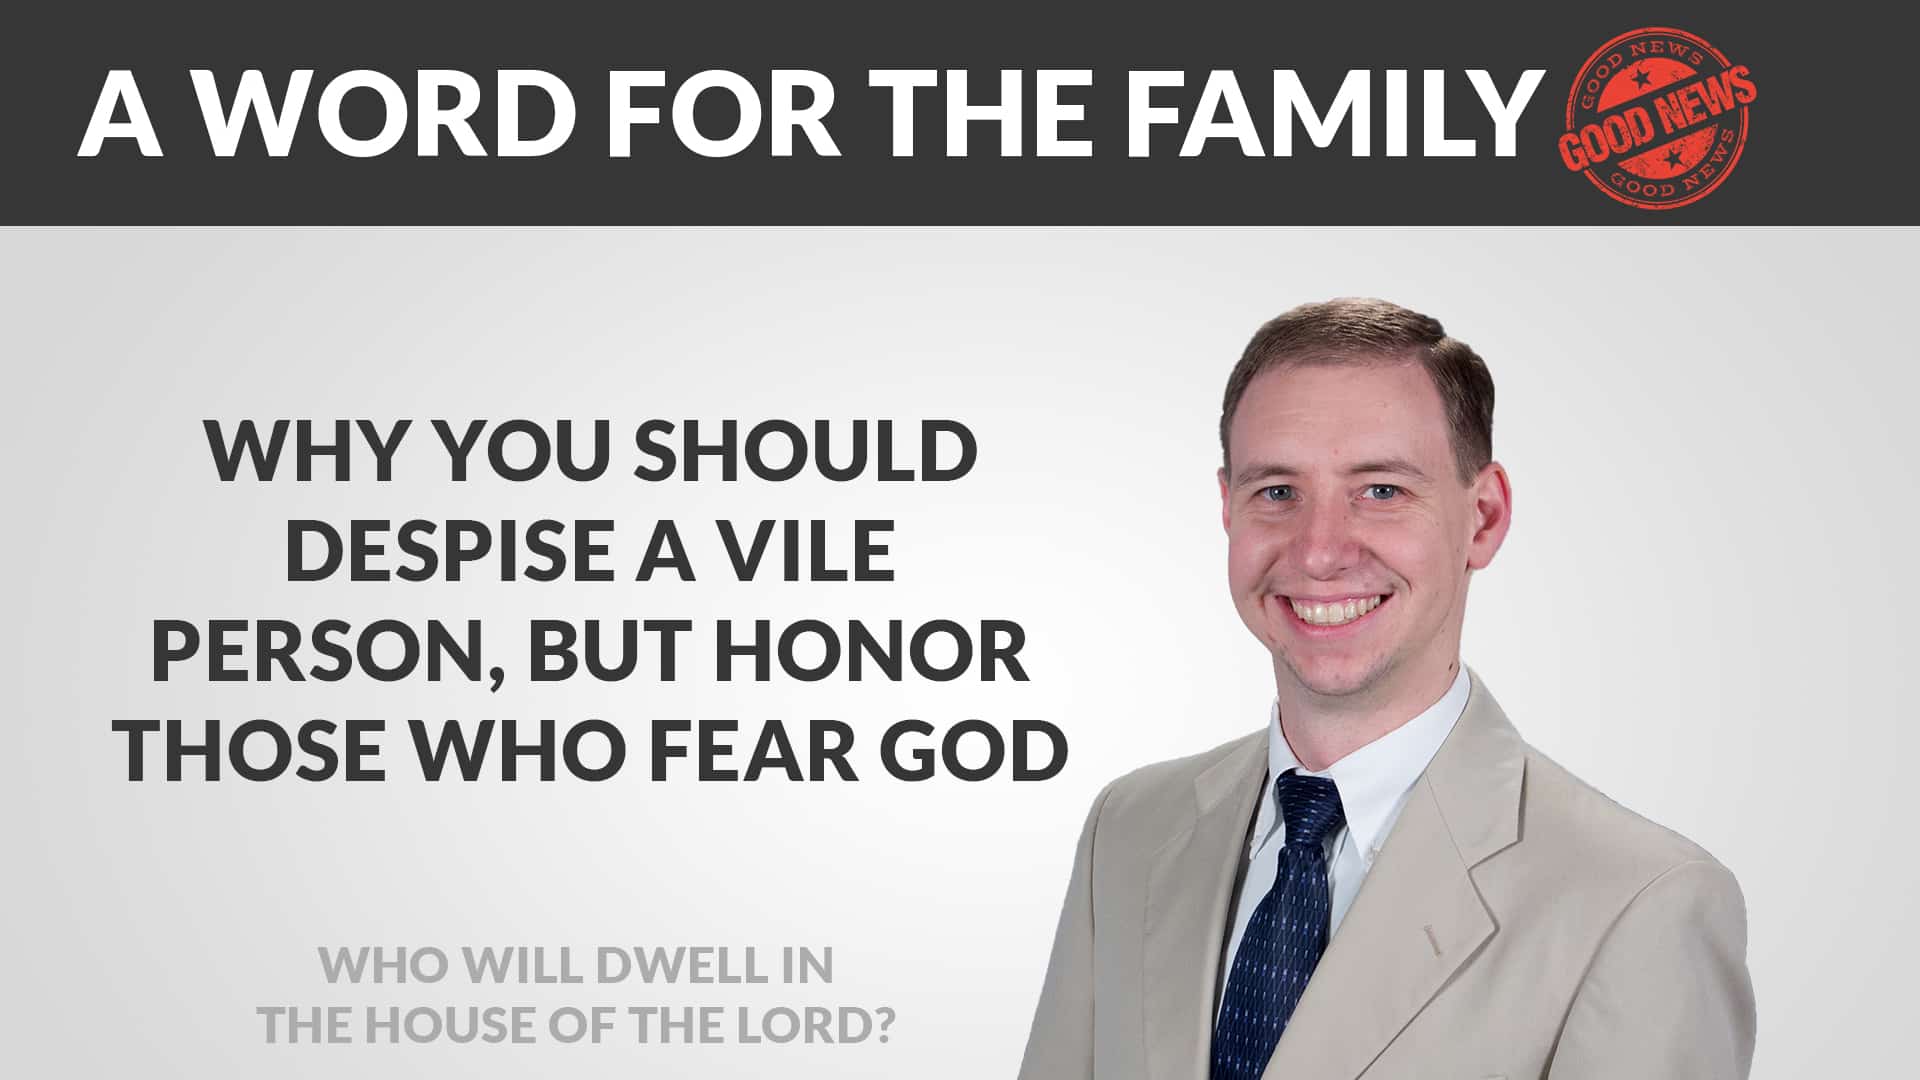 Featured image for “Why You Should Despise A Vile Person, But Honor Those who Fear God”